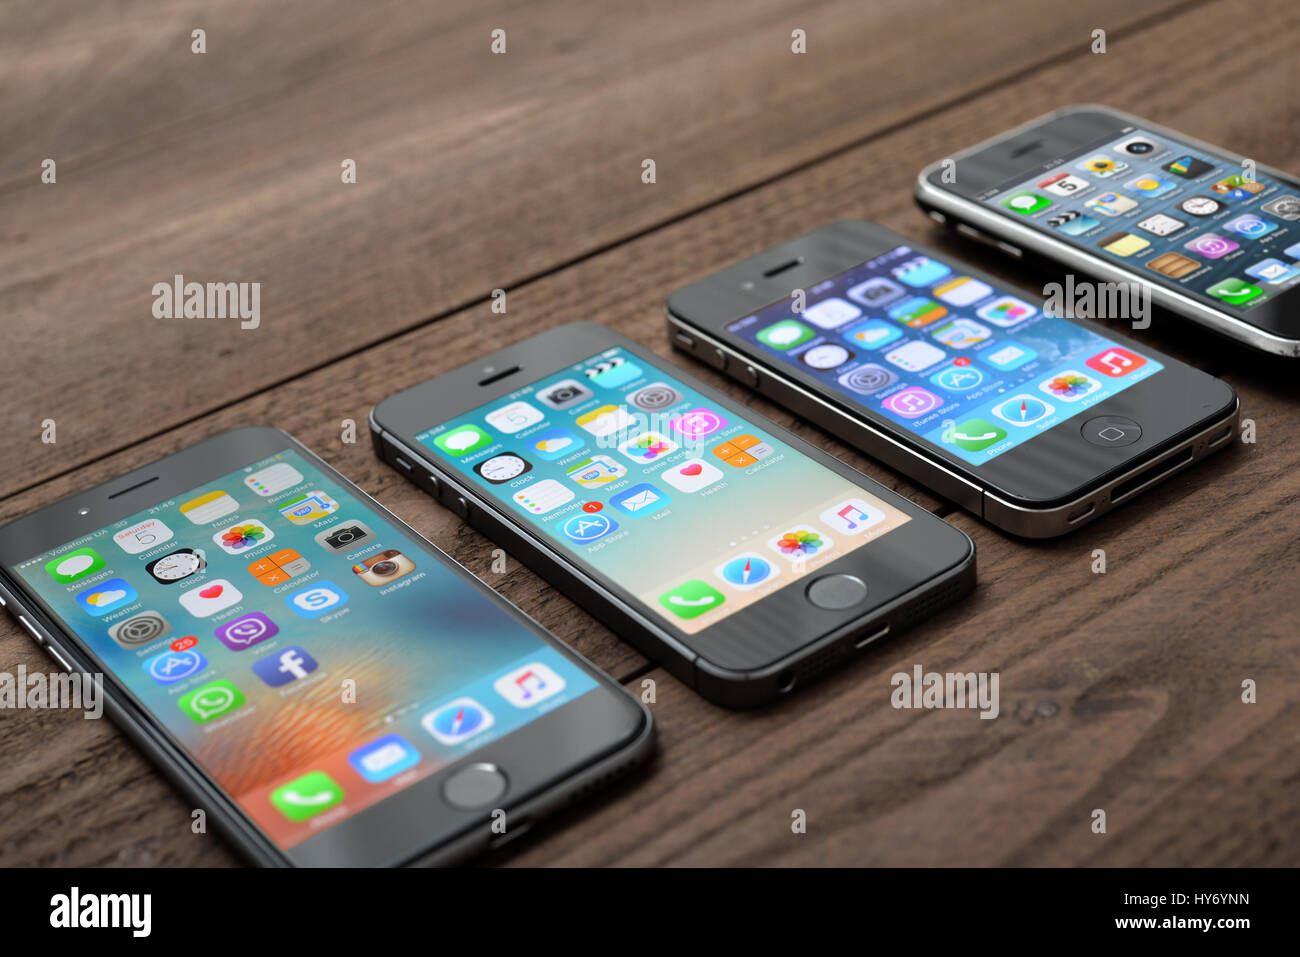 Kiev, Ukraine - March 05, 2016: Front view of a space grey color iPhones 6, 5s, 4 and 3gs generation showing the home screens on wooden background. Stock Photo